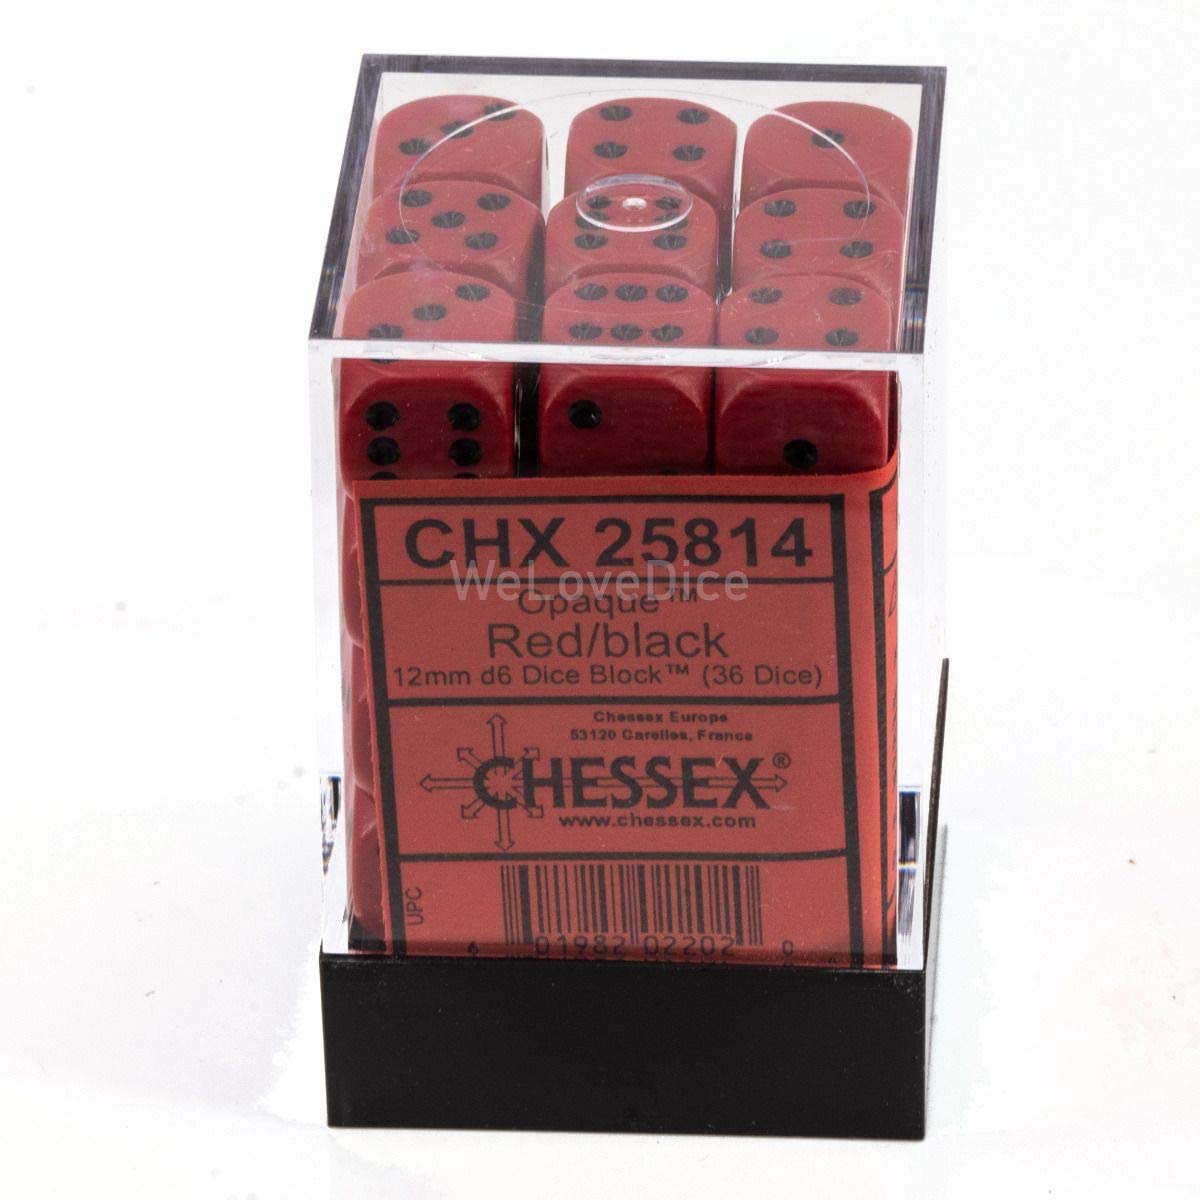 Chessex Dice: D6 Block 12mm - Opaque - Red with Black (CHX 25814) - Gamescape